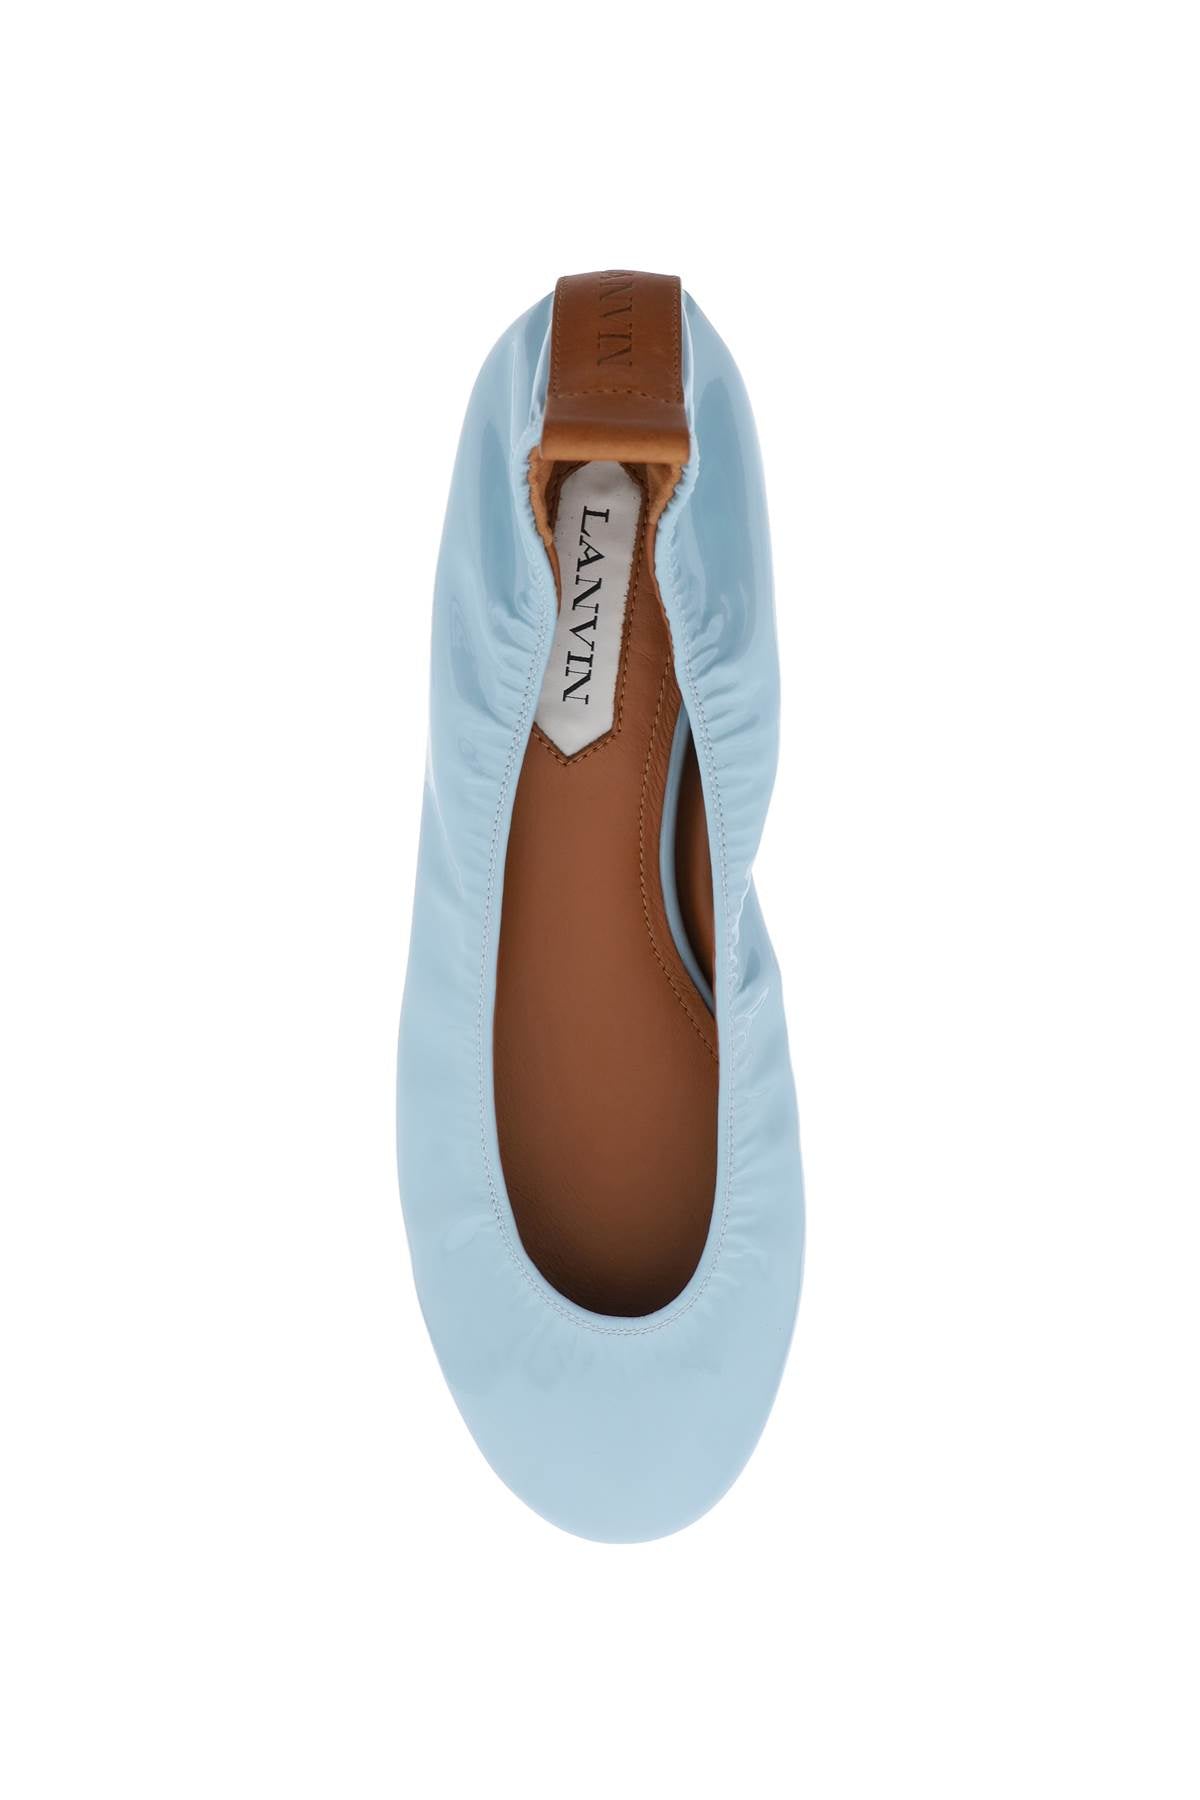 Lanvin the ballerina flat in patent leather-1